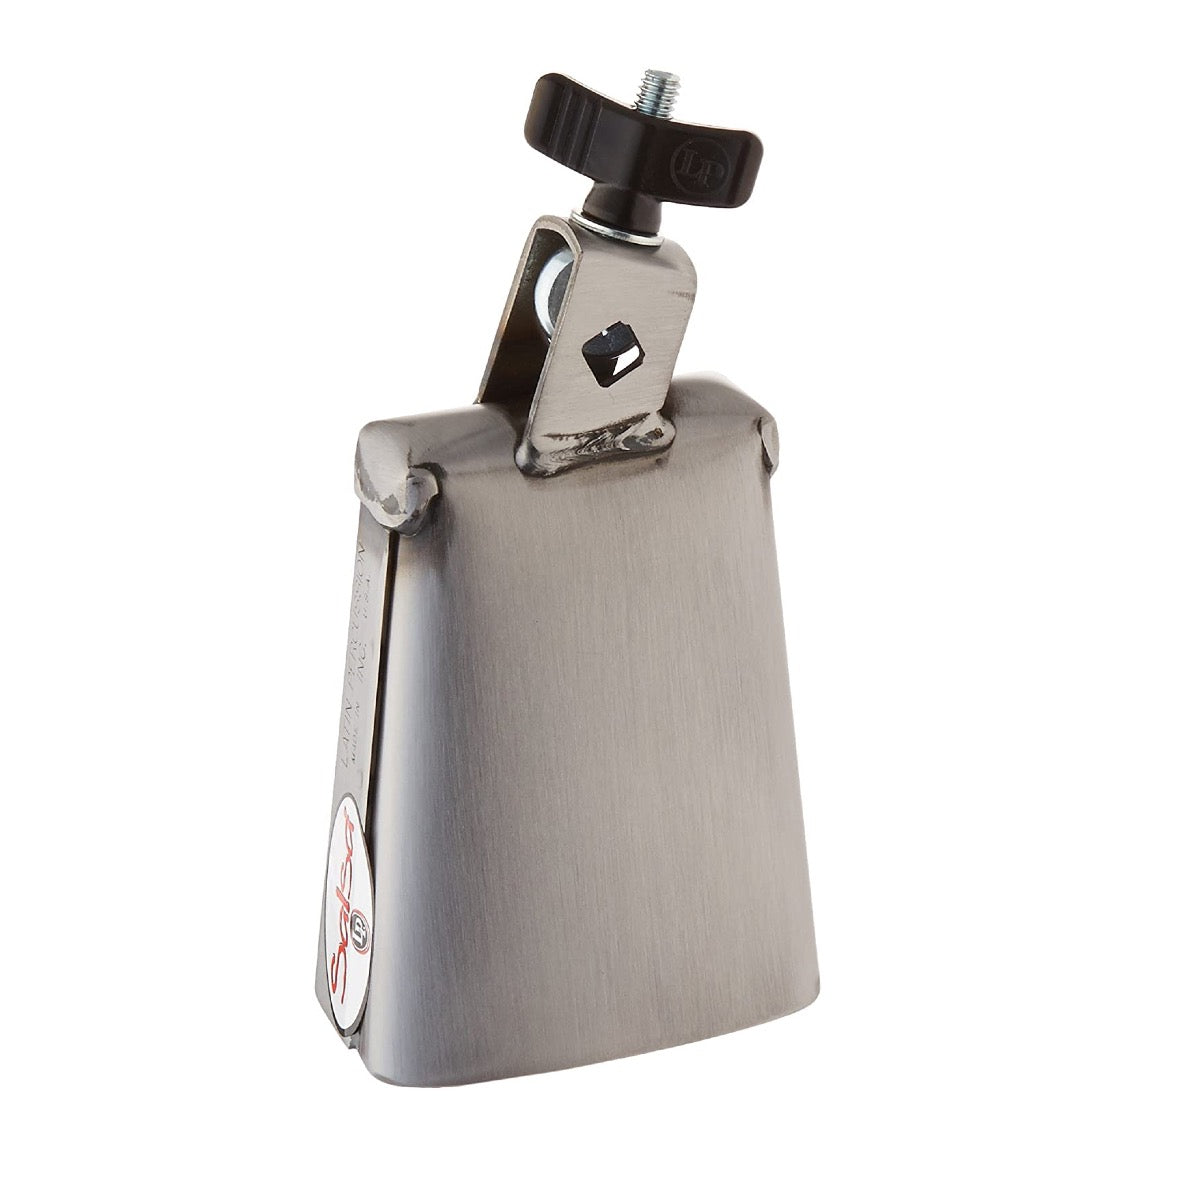 Latin Percussion ES12 Salsa Cha-Cha Low Pitch Cowbell